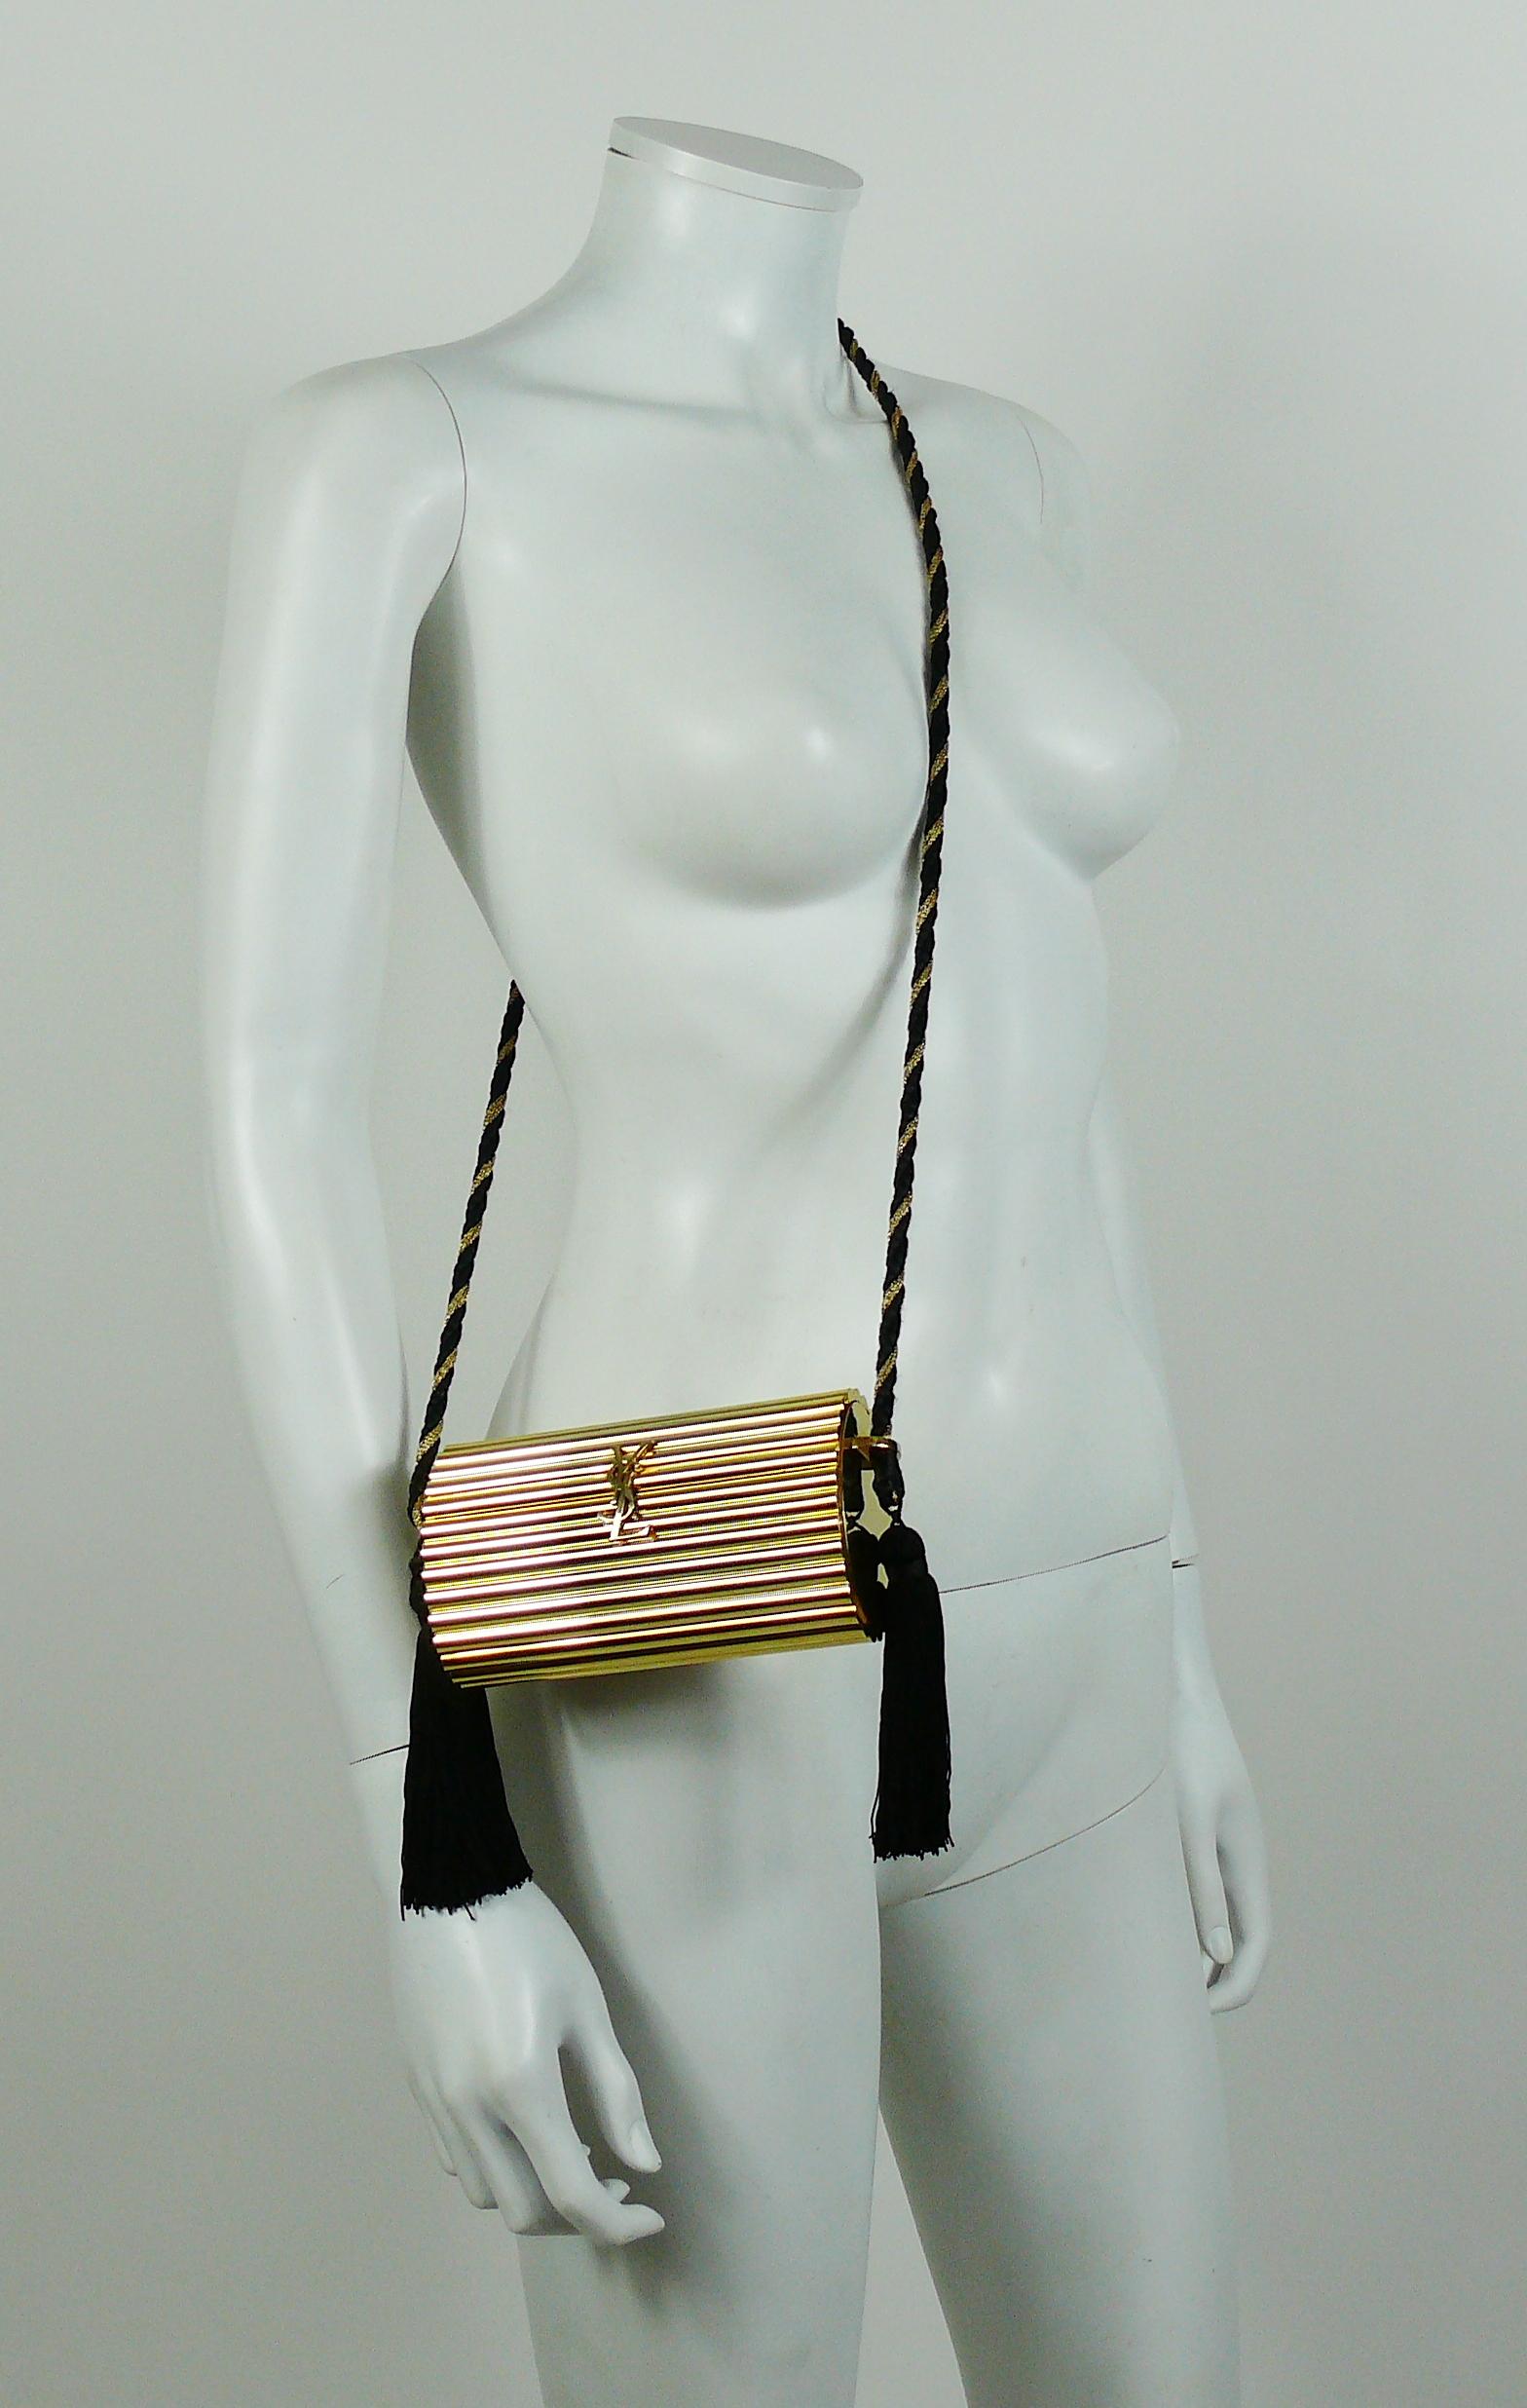 YVES SAINT LAURENT rare and collectable vintage gold tone ribbed minaudiere featuring :

- Hard box cylindric resin  body.
- Large YSL logo at the front.
- Black and gold braided shoulder strap.
- Long black tassels.
- Gold canvas